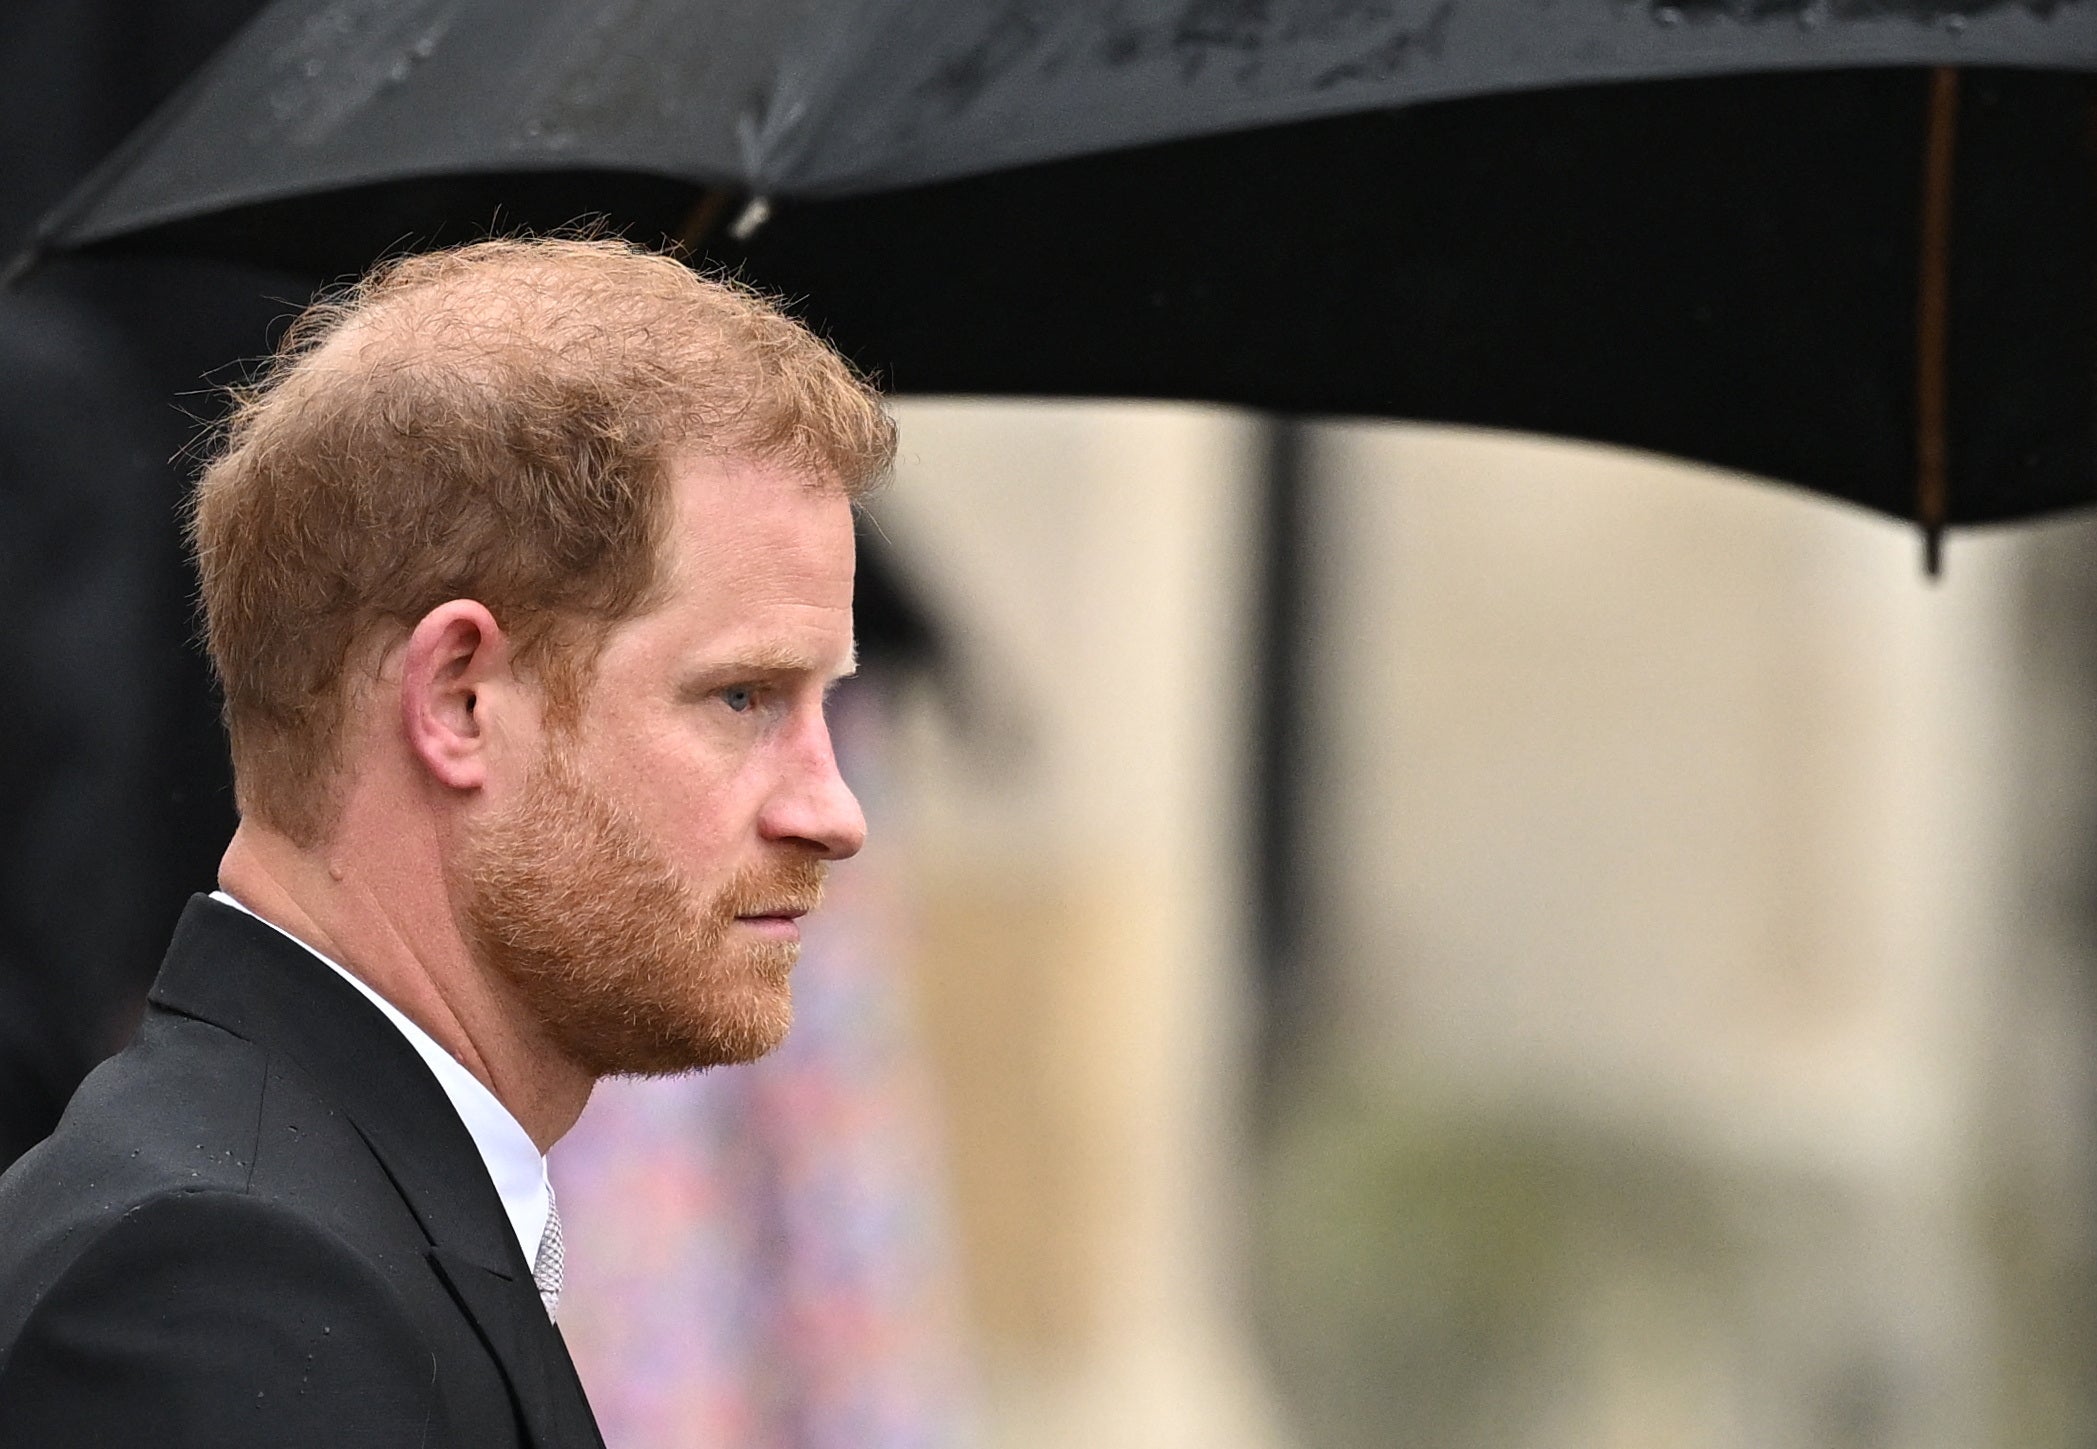 <p>My wish is that the Duke of Sussex finds his way</p>